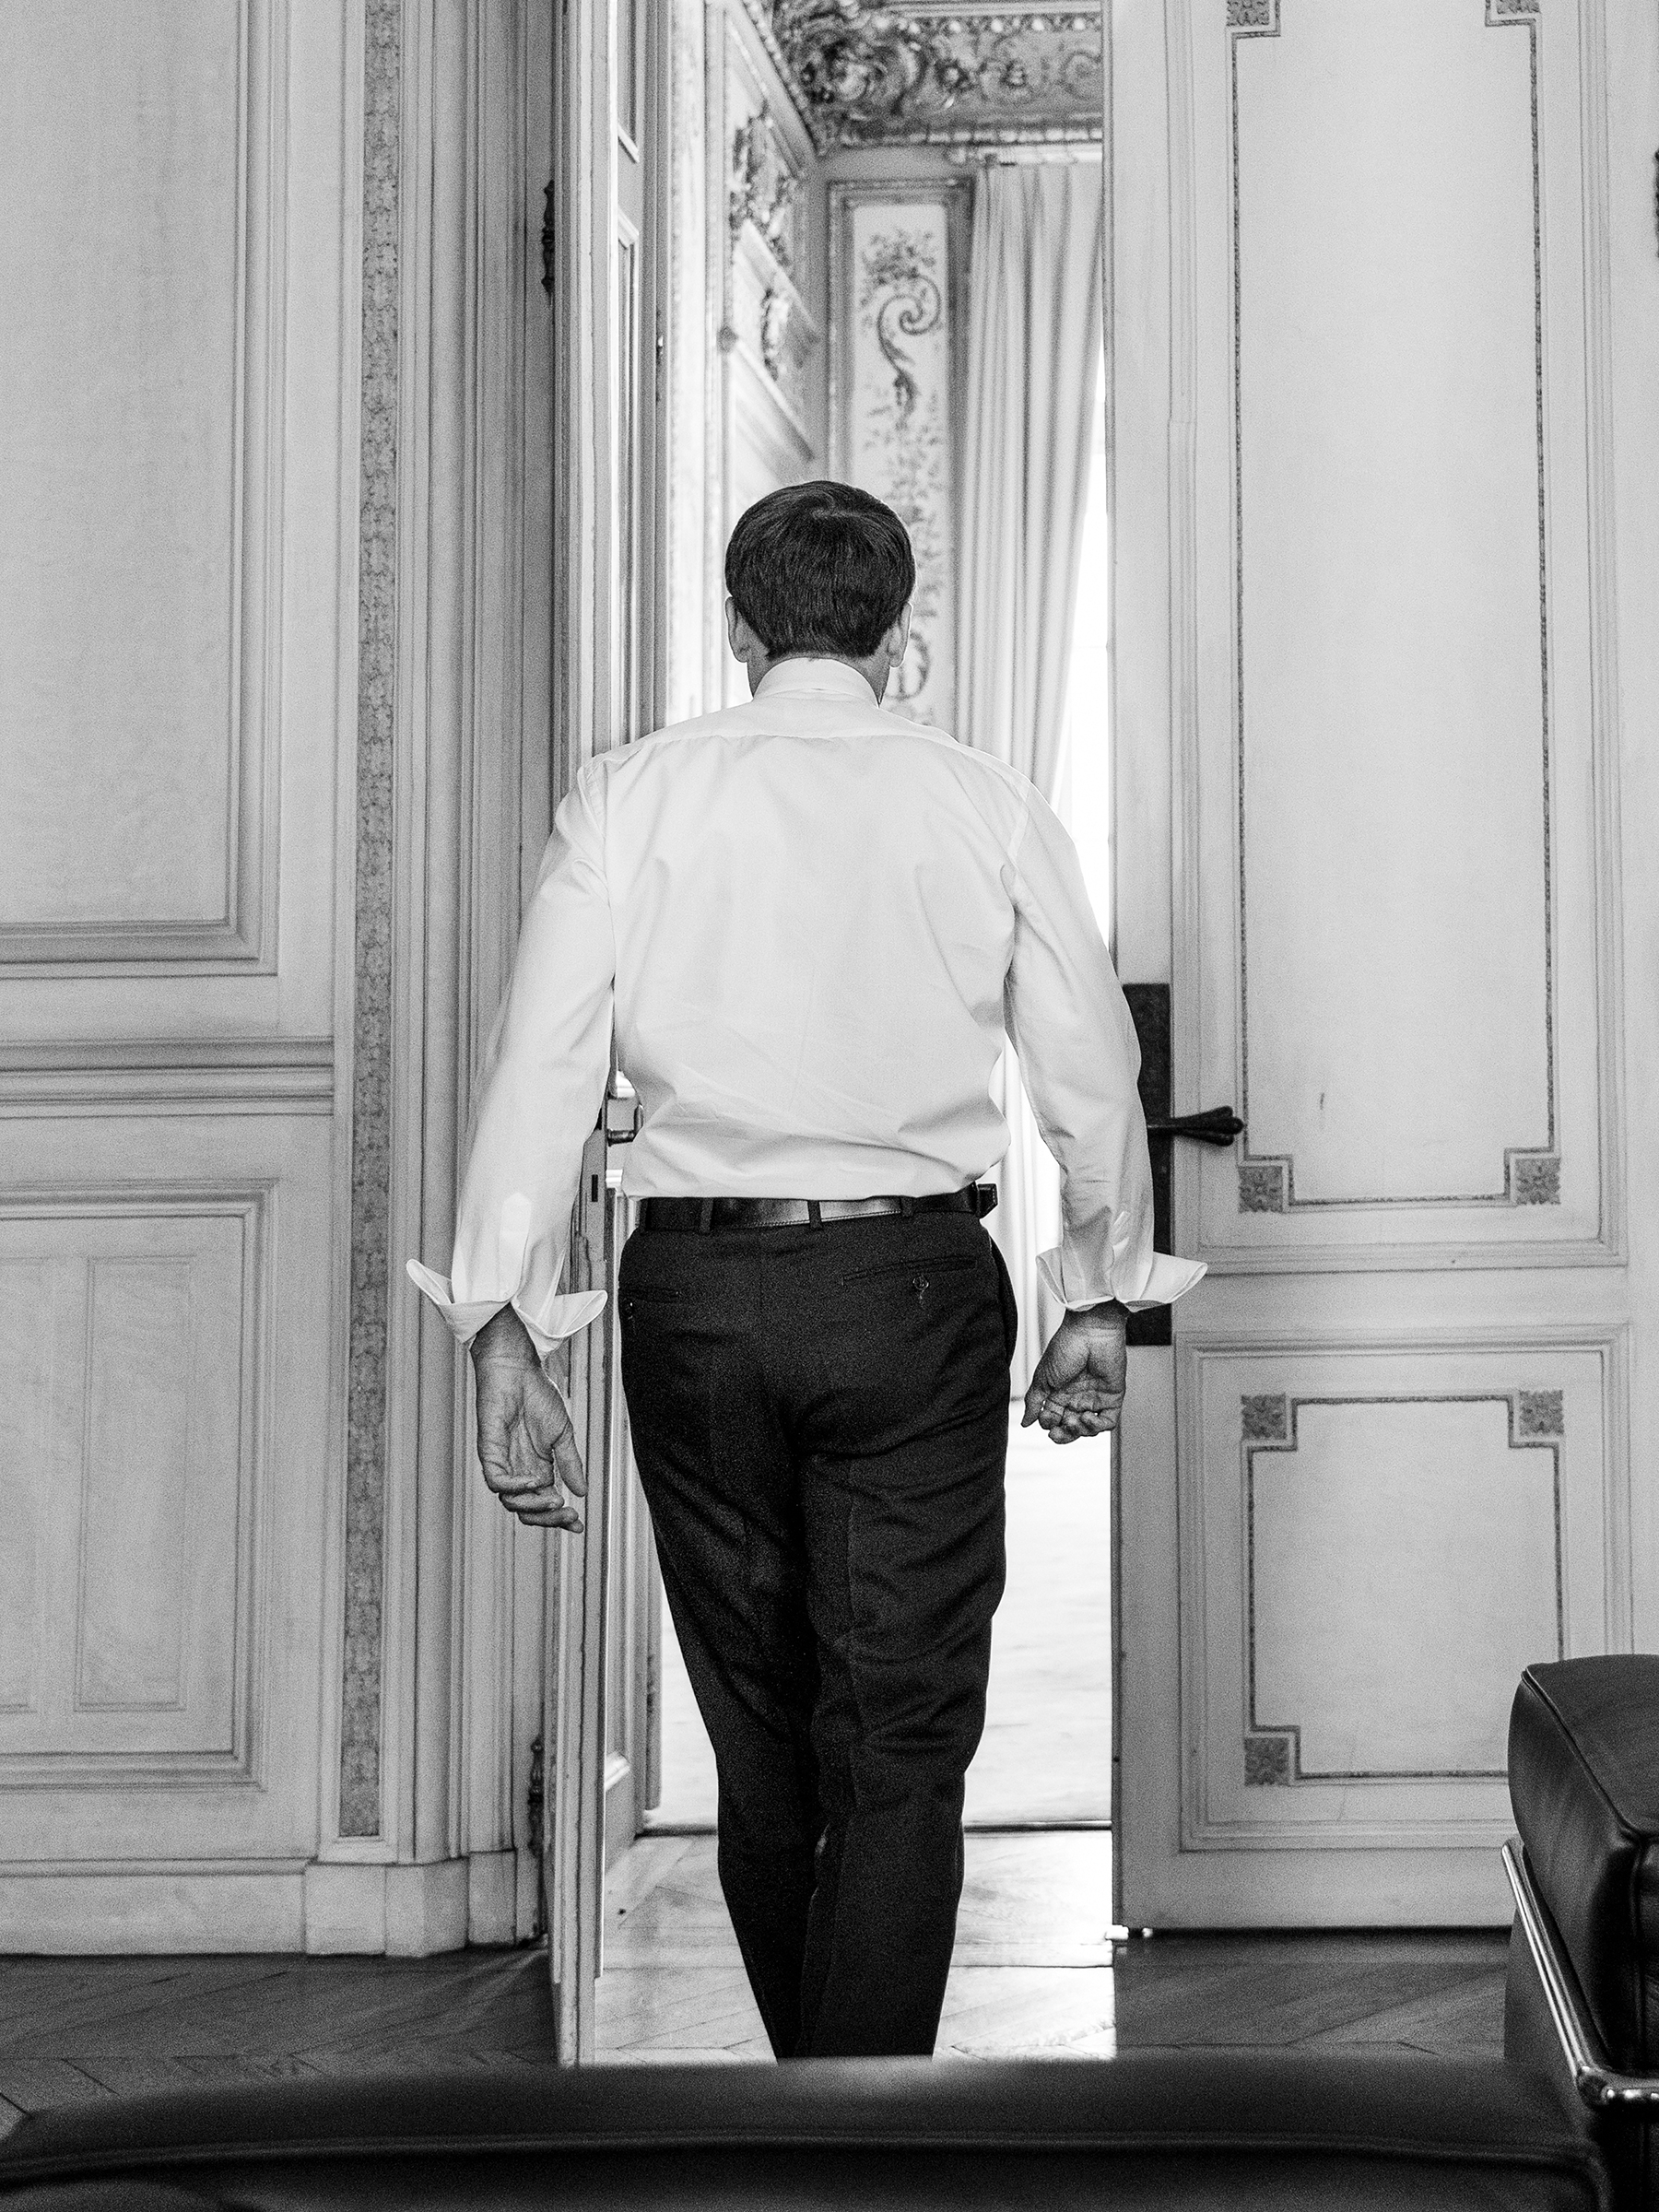 Emmanuel Macron and the two years that changed France 